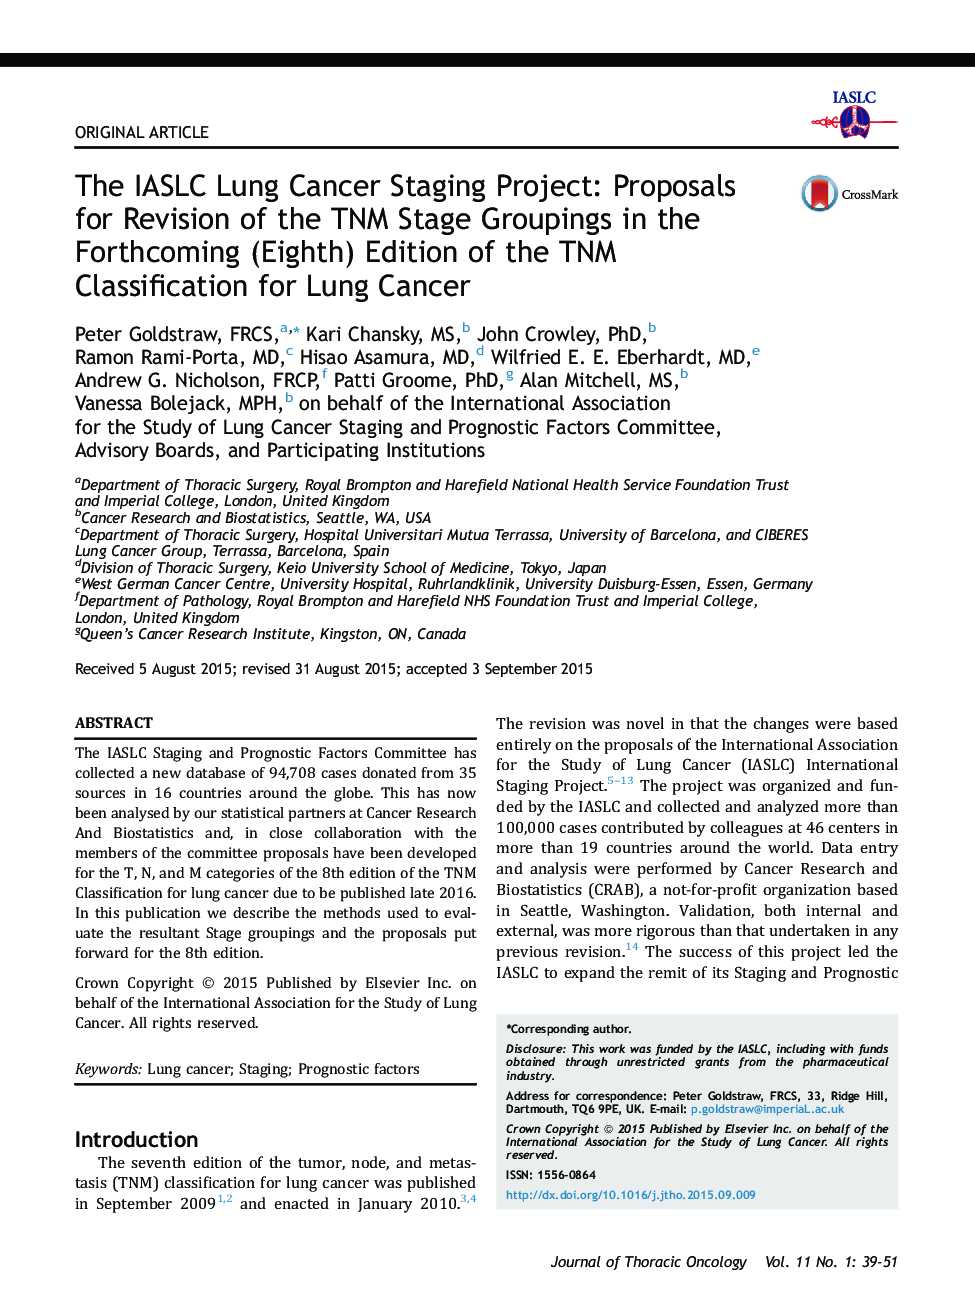 The IASLC Lung Cancer Staging Project: Proposals for Revision of the TNM Stage Groupings in the Forthcoming (Eighth) Edition of the TNM Classification for Lung Cancer 